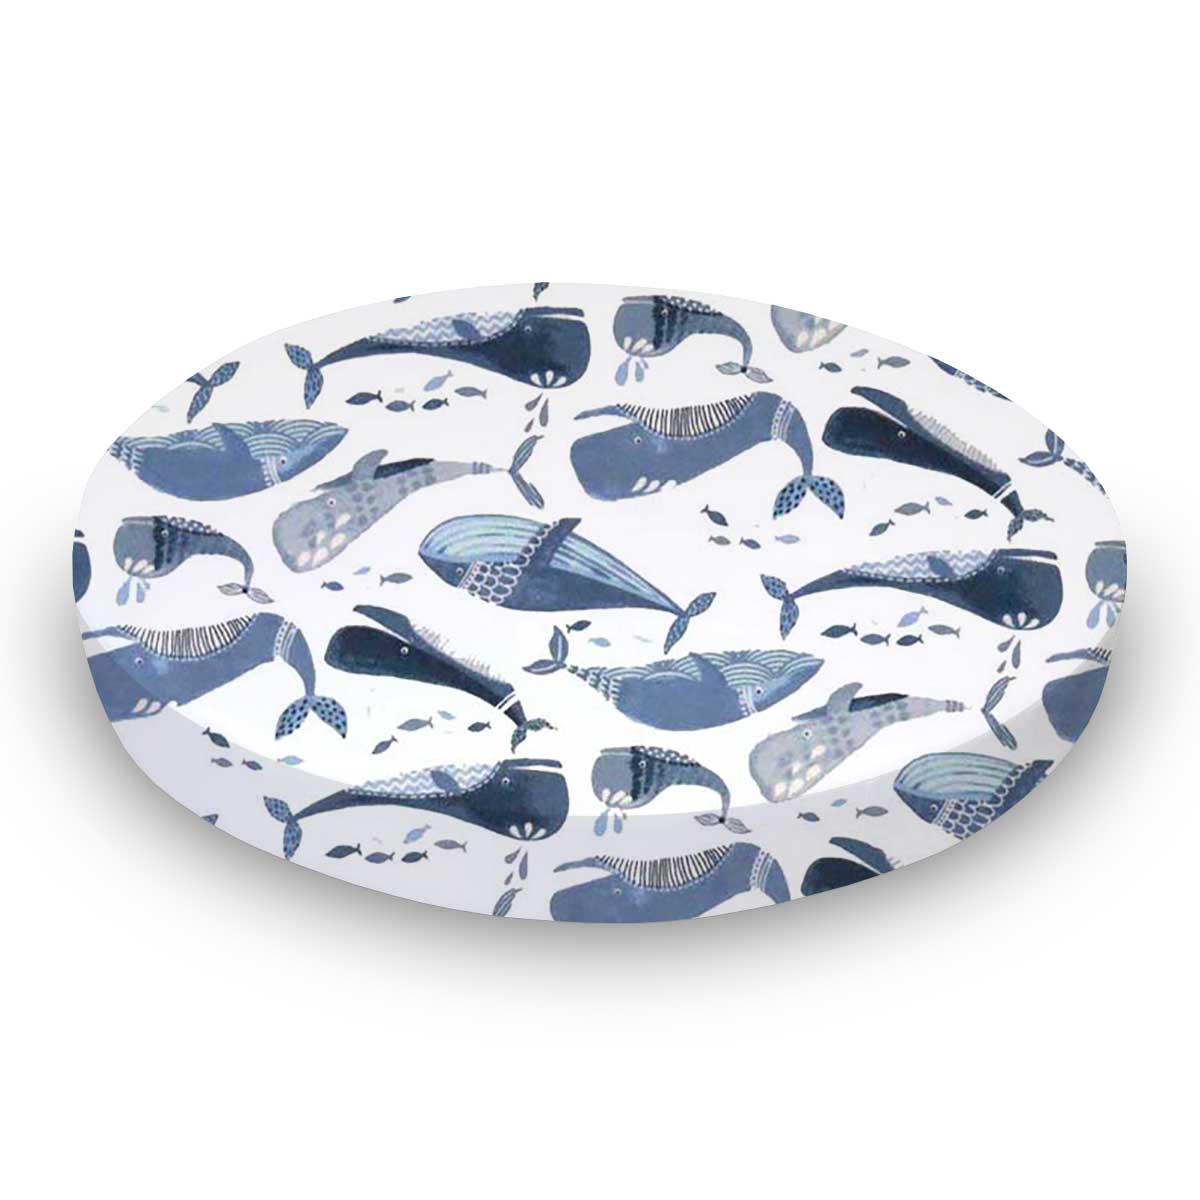 Oval Crib (Stokke Sleepi) - Blue Whales - Fitted  Oval